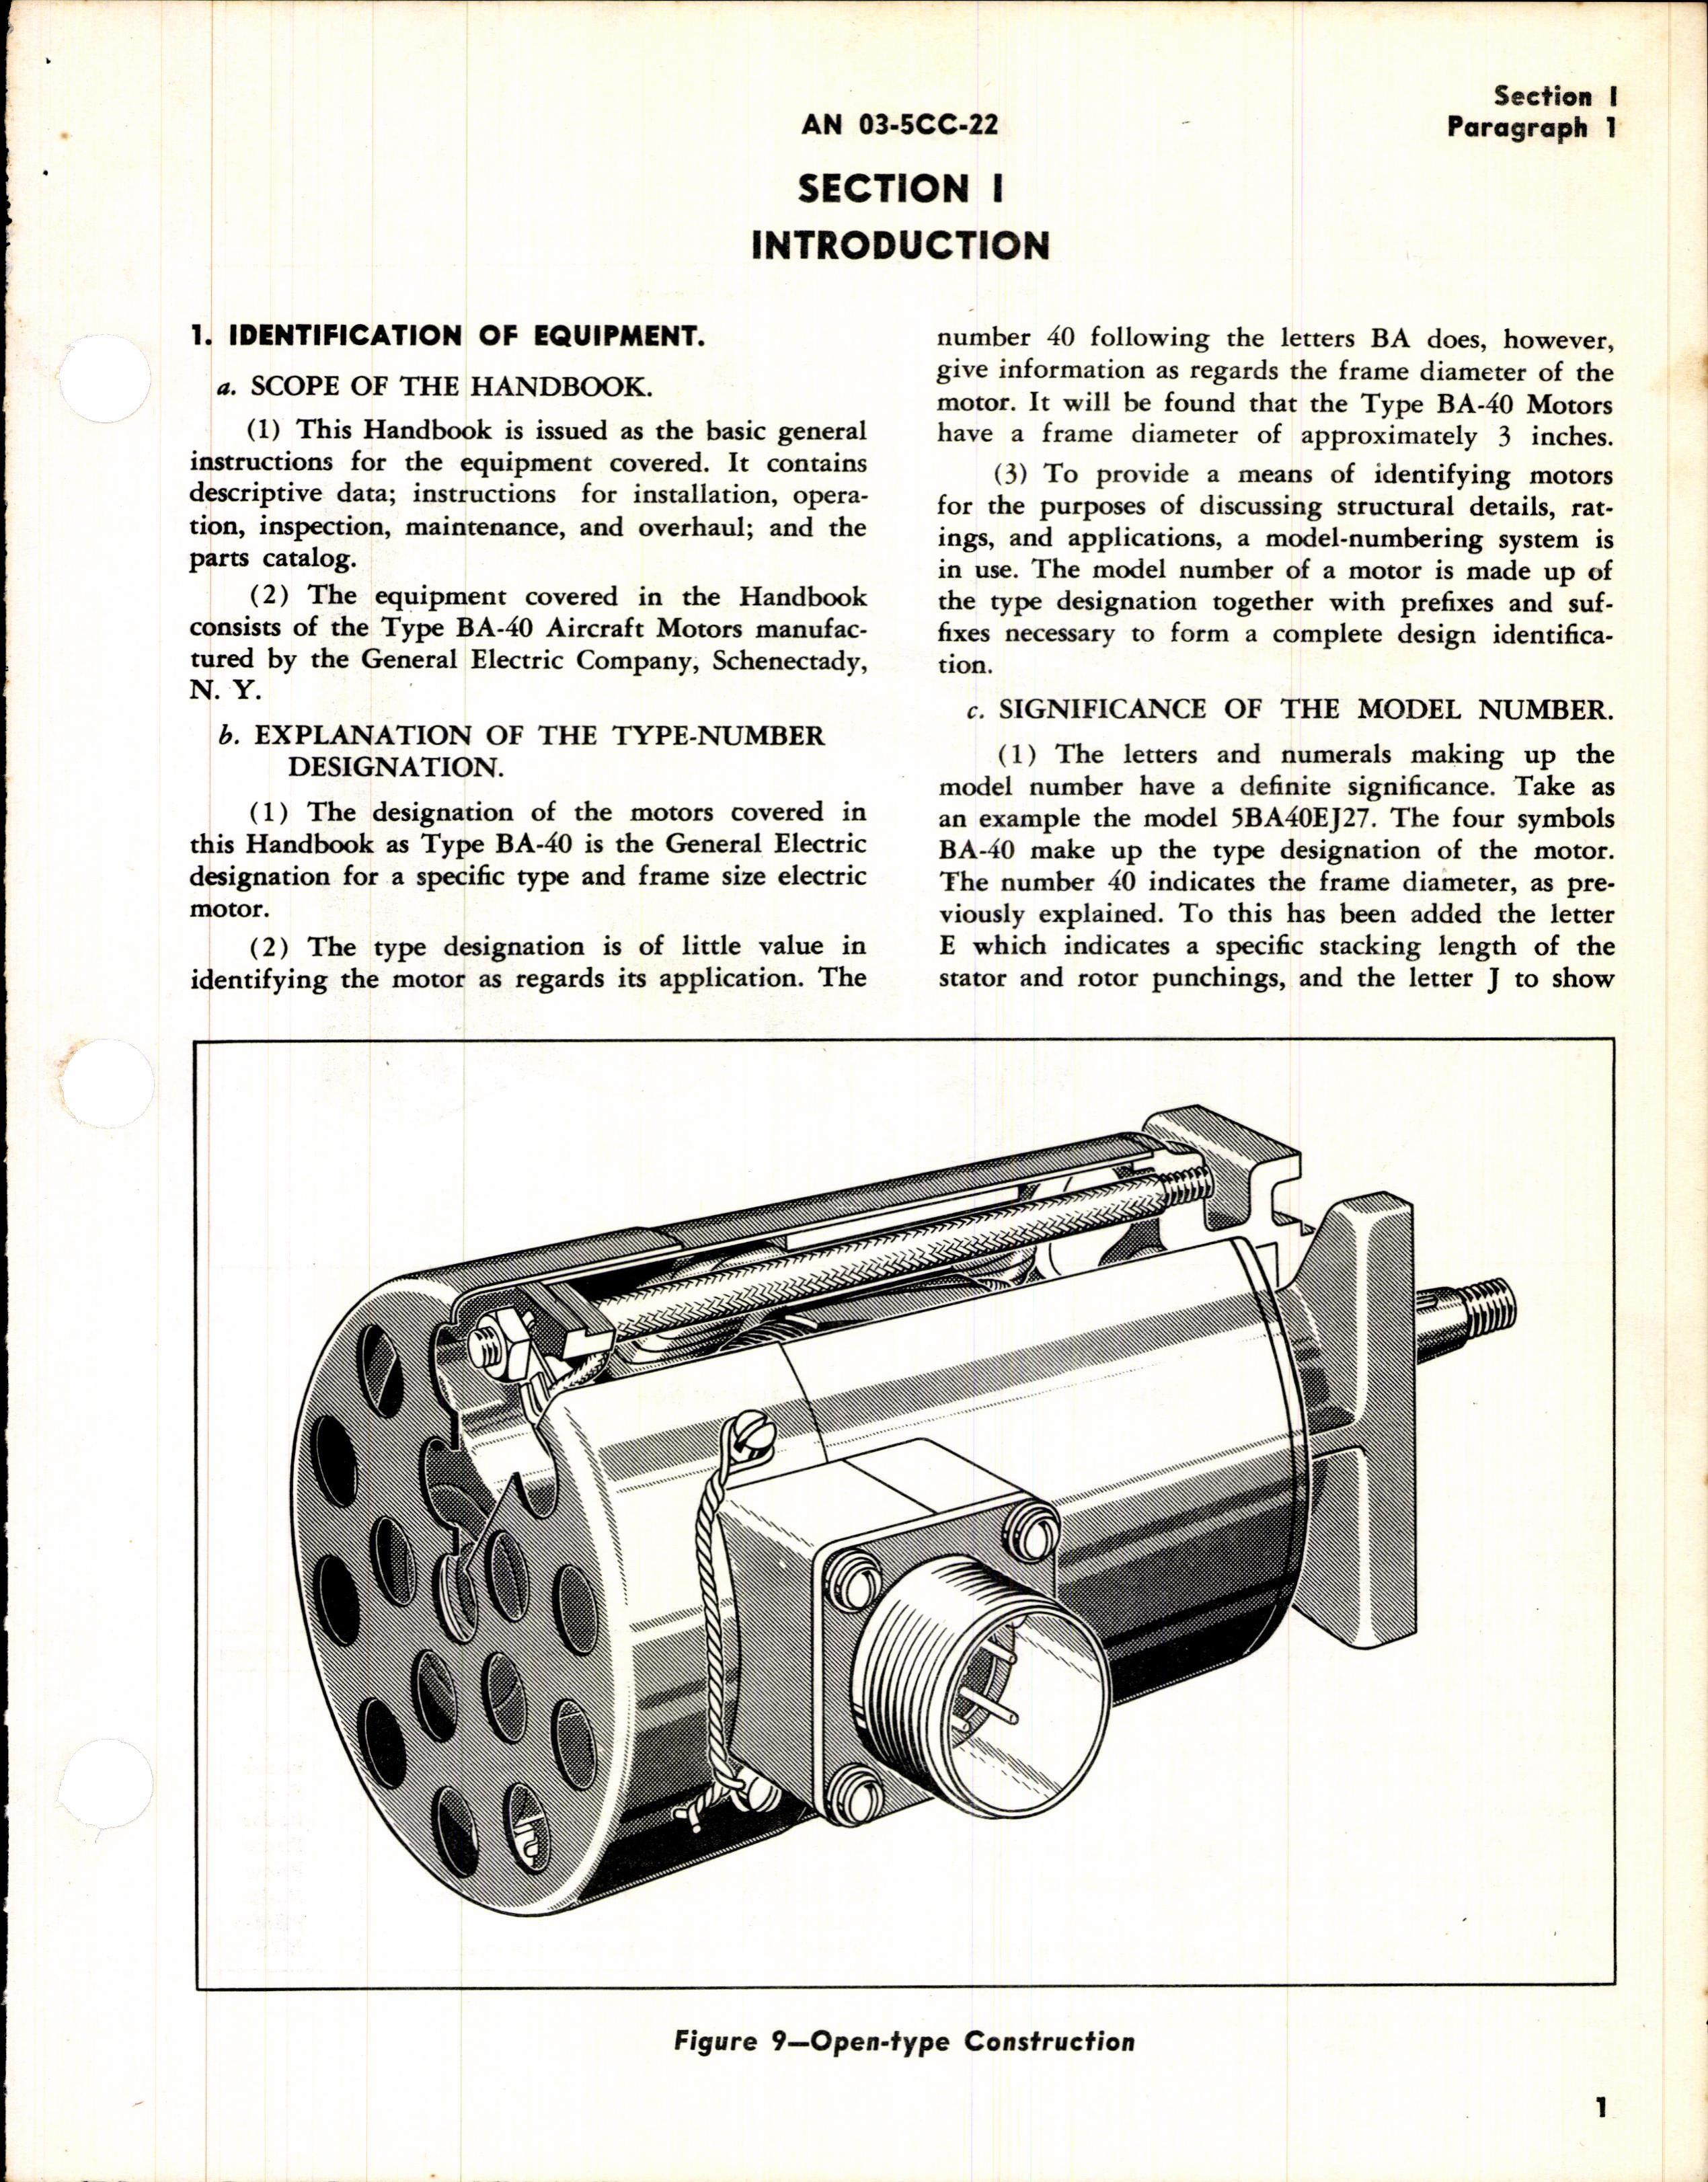 Sample page 3 from AirCorps Library document: HB of Instructions with Parts Catalog for Model 5BA40 Electric Motors